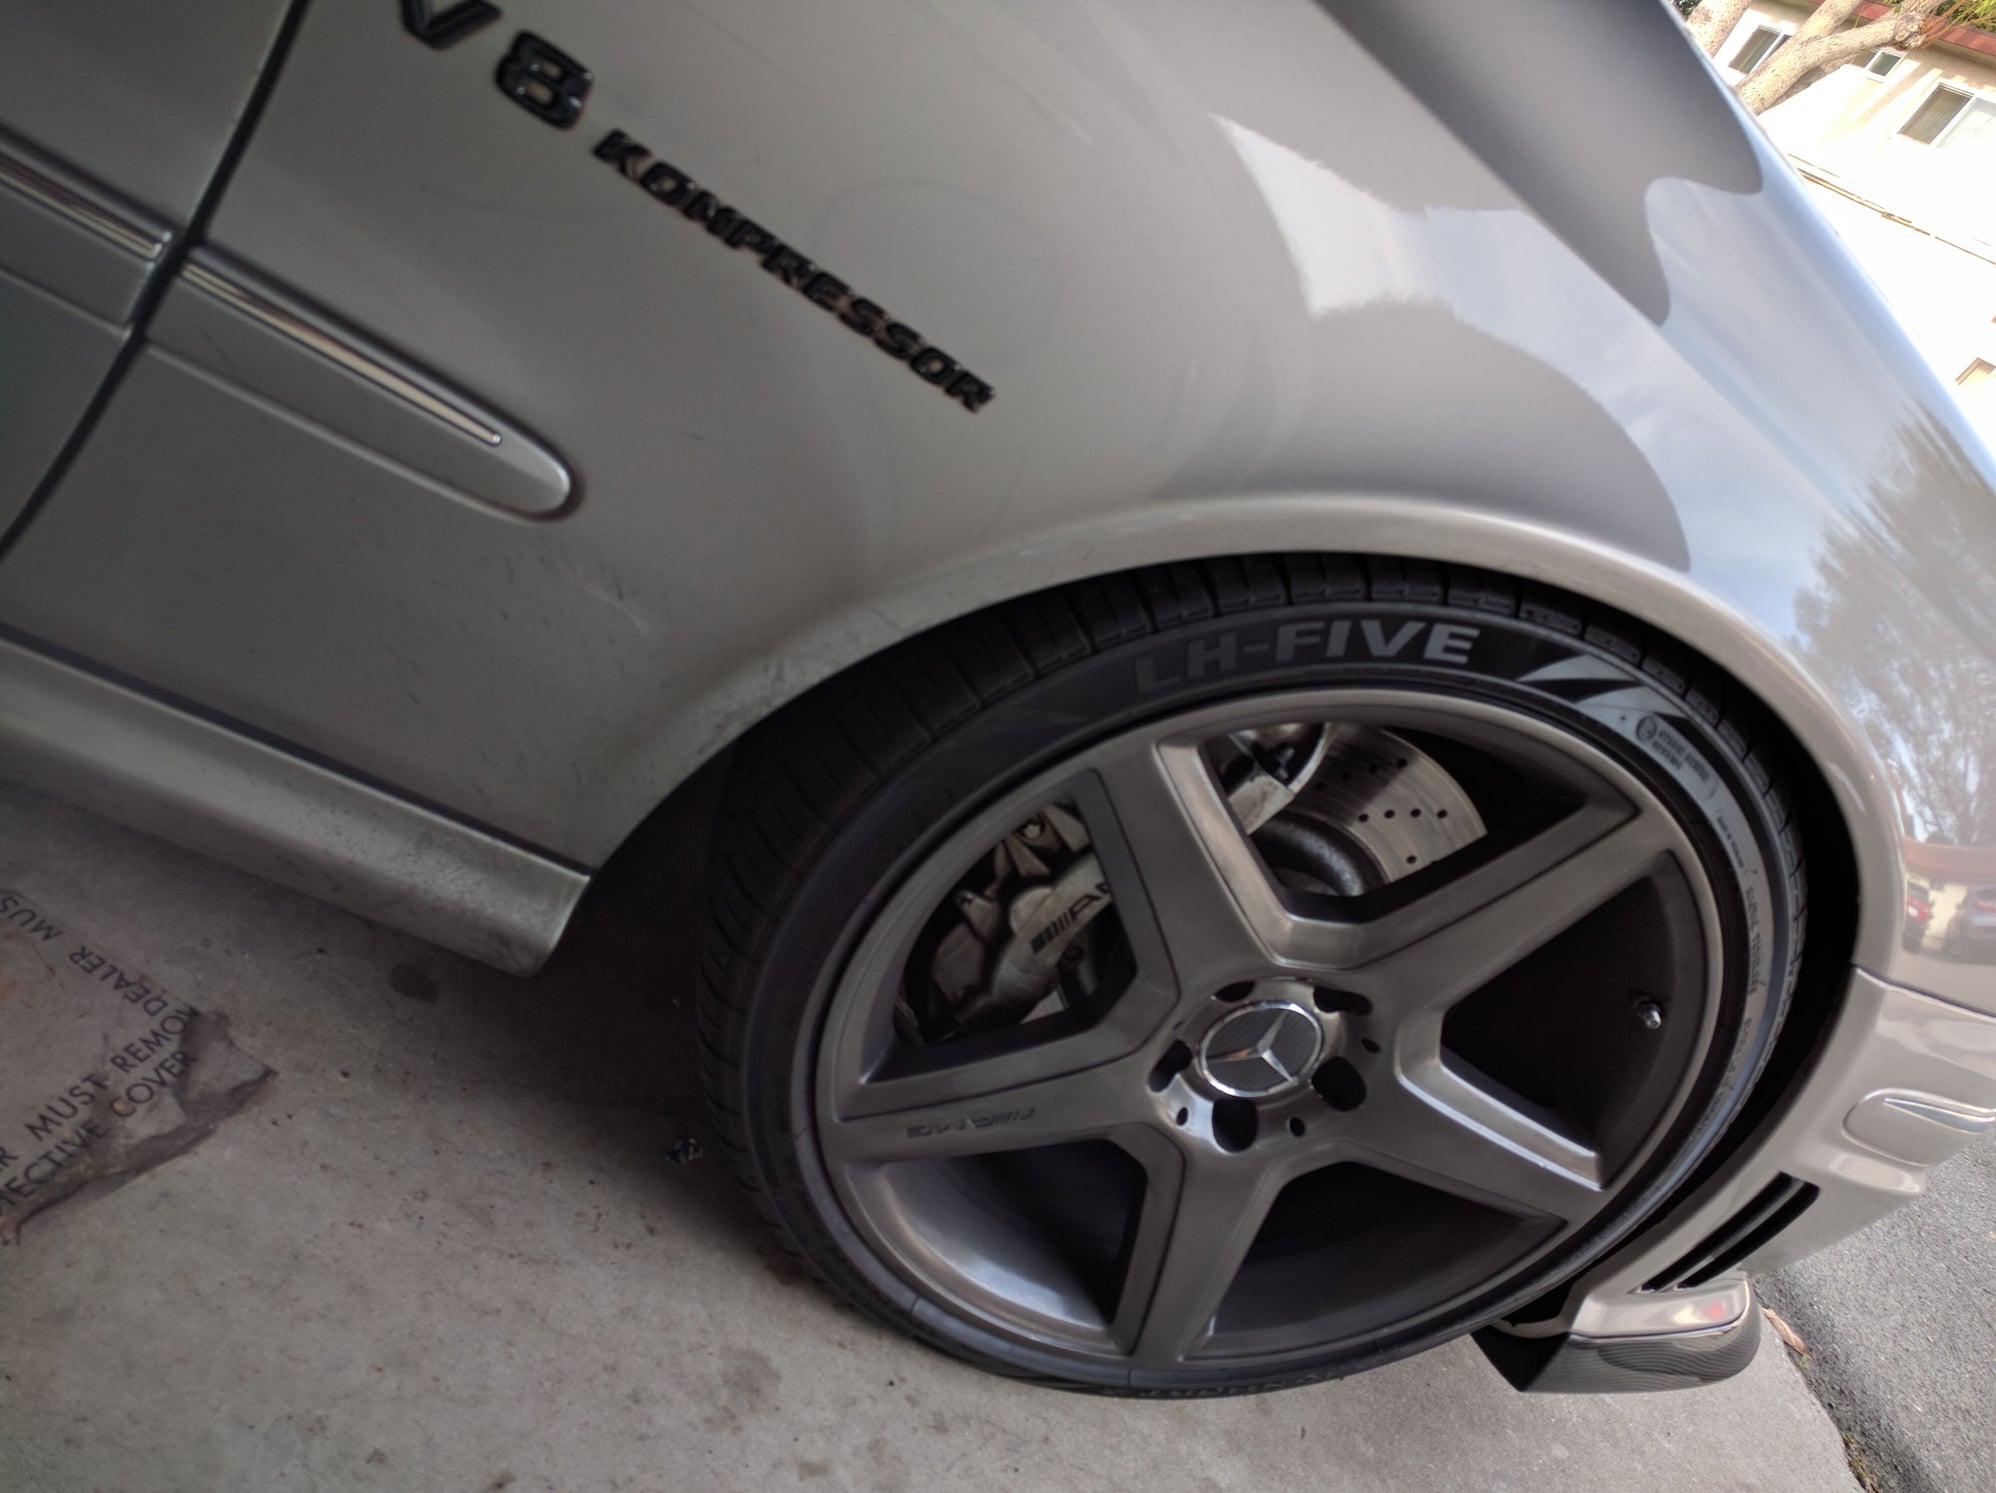 Wheels and Tires/Axles - W219 CLS55 AMG Wheels - Used - 2003 to 2006 Mercedes-Benz E55 AMG - 2007 to 2009 Mercedes-Benz CLS55 AMG - 2007 to 2009 Mercedes-Benz E63 AMG - 2003 to 2006 Mercedes-Benz E500 - Cerritos, CA 90703, United States